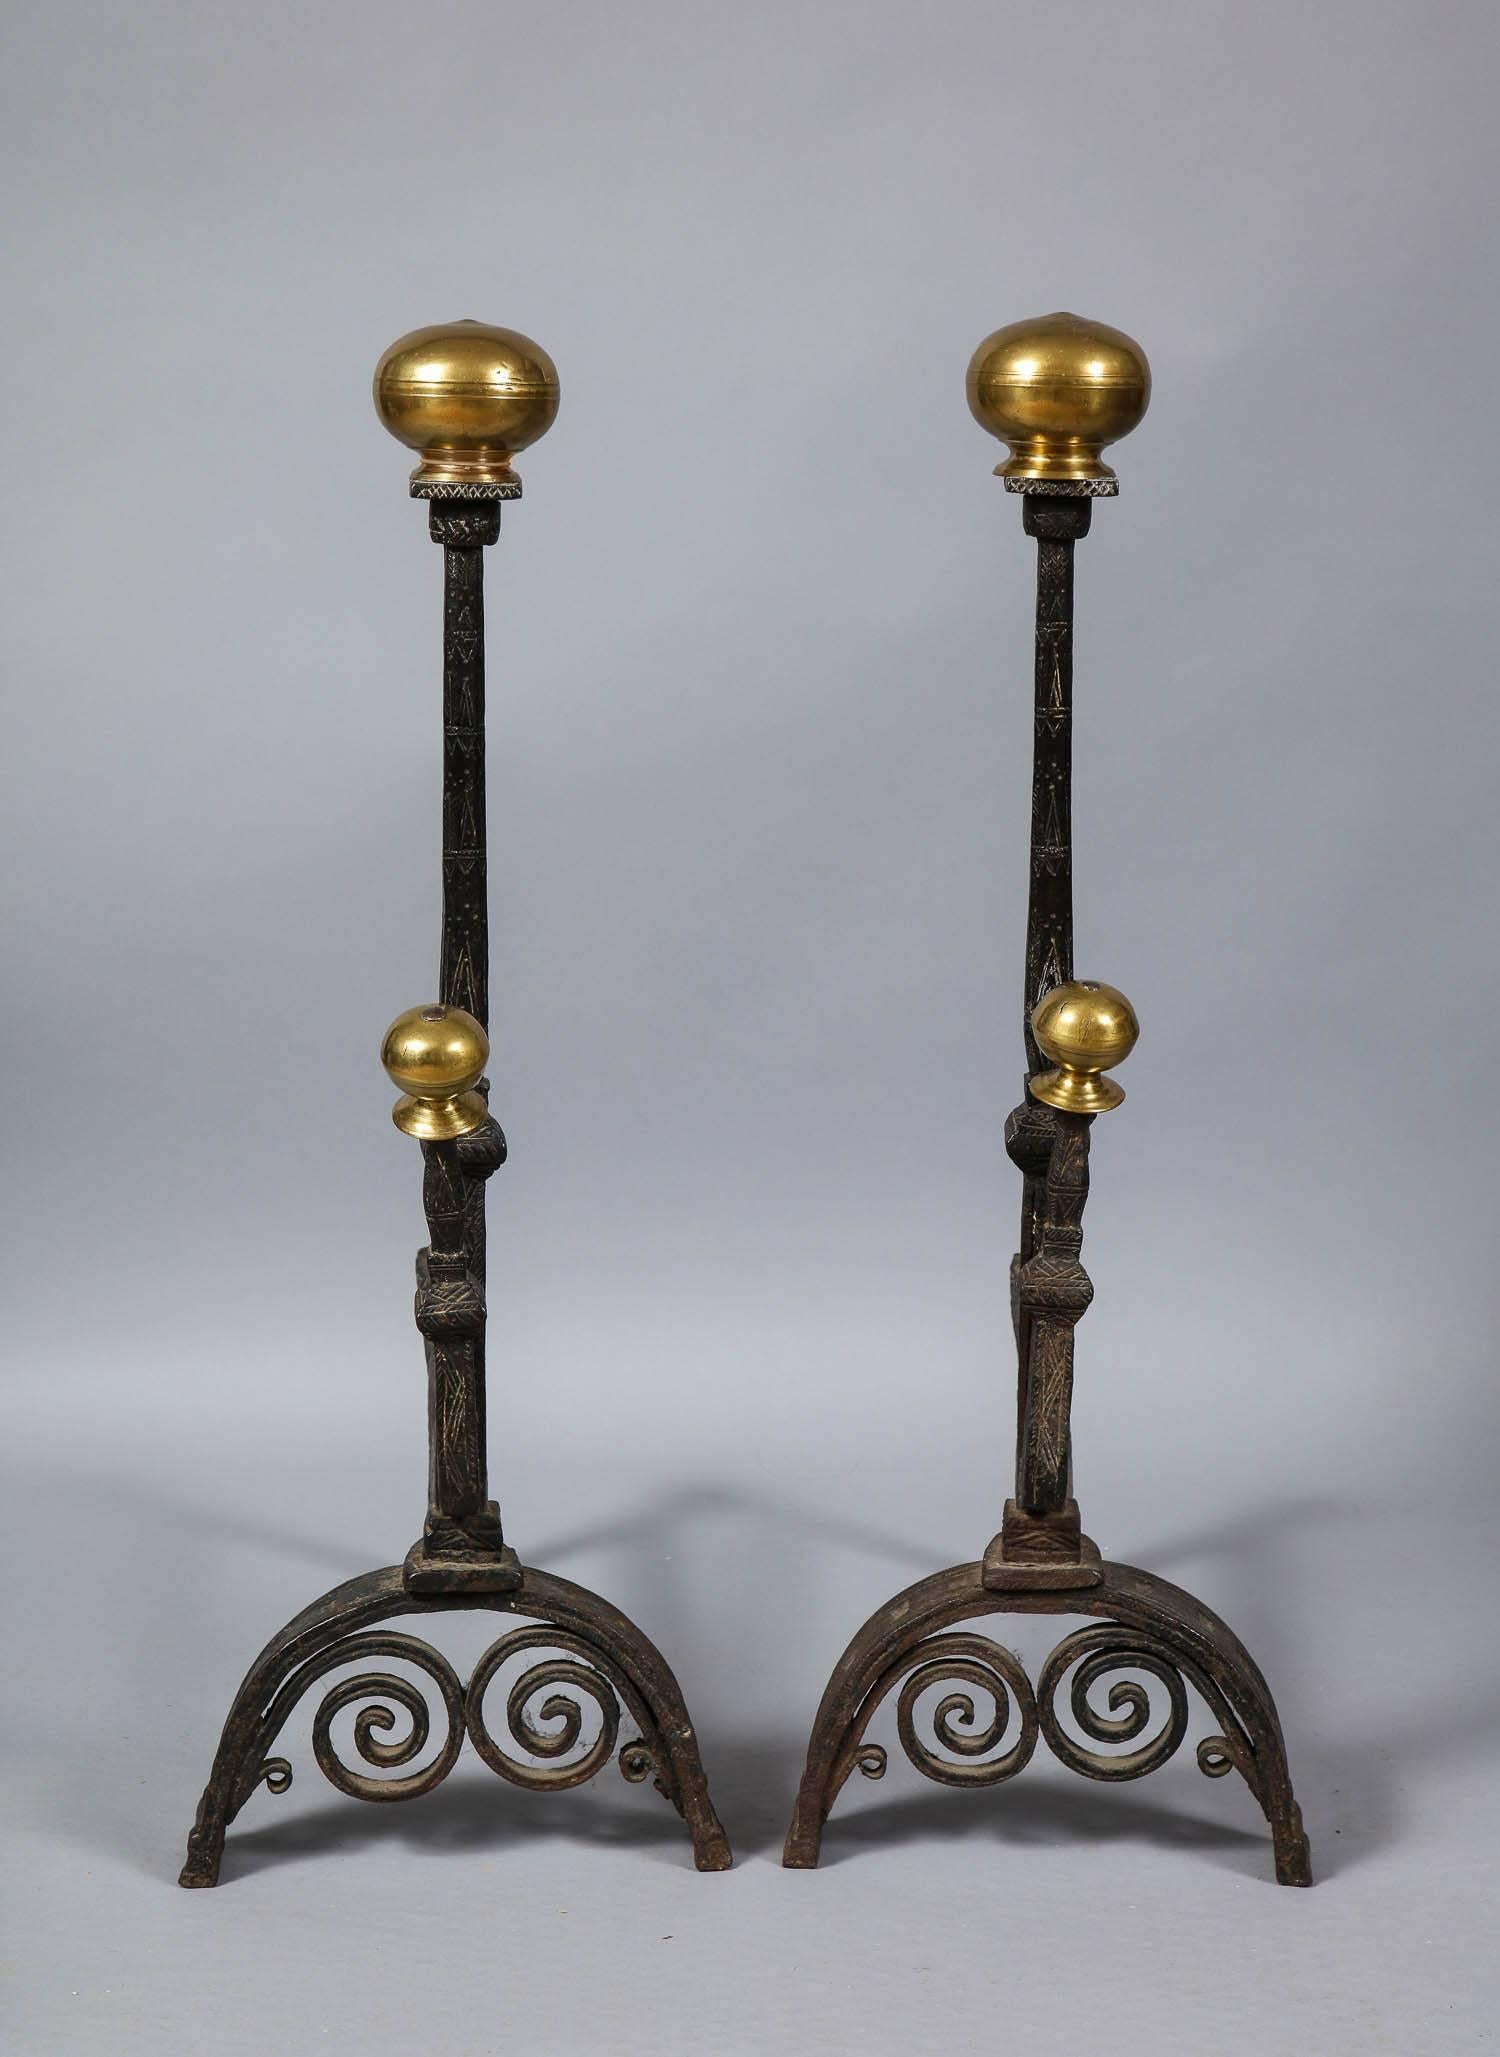 Fine pair of late 17th-early 18th century bronze and wrought iron andirons, the suppressed ball finials over hand-forged upper shafts with matching spit support, on hand-forged shafts decorated with incised linework, on arched feet with under